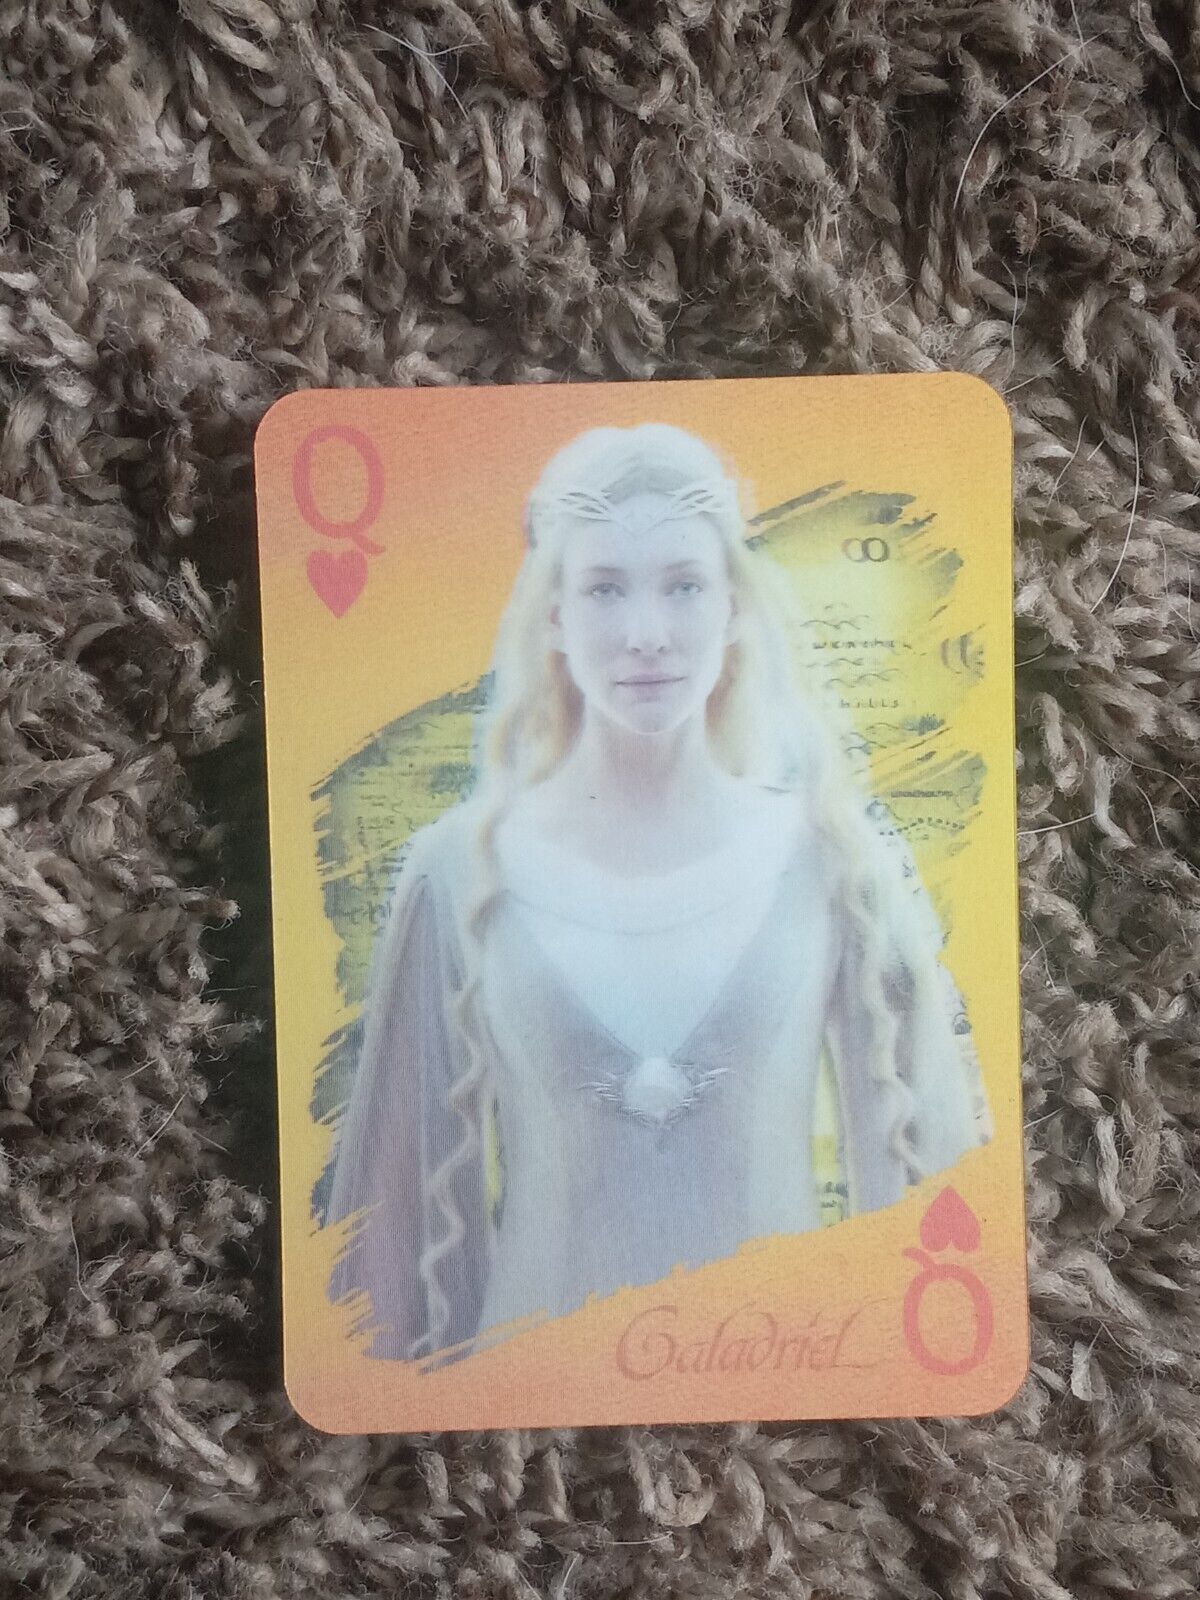 The Hobbit (2012 Cartamundi 3D Playing Cards), Galadriel, Red Queen of Hearts 